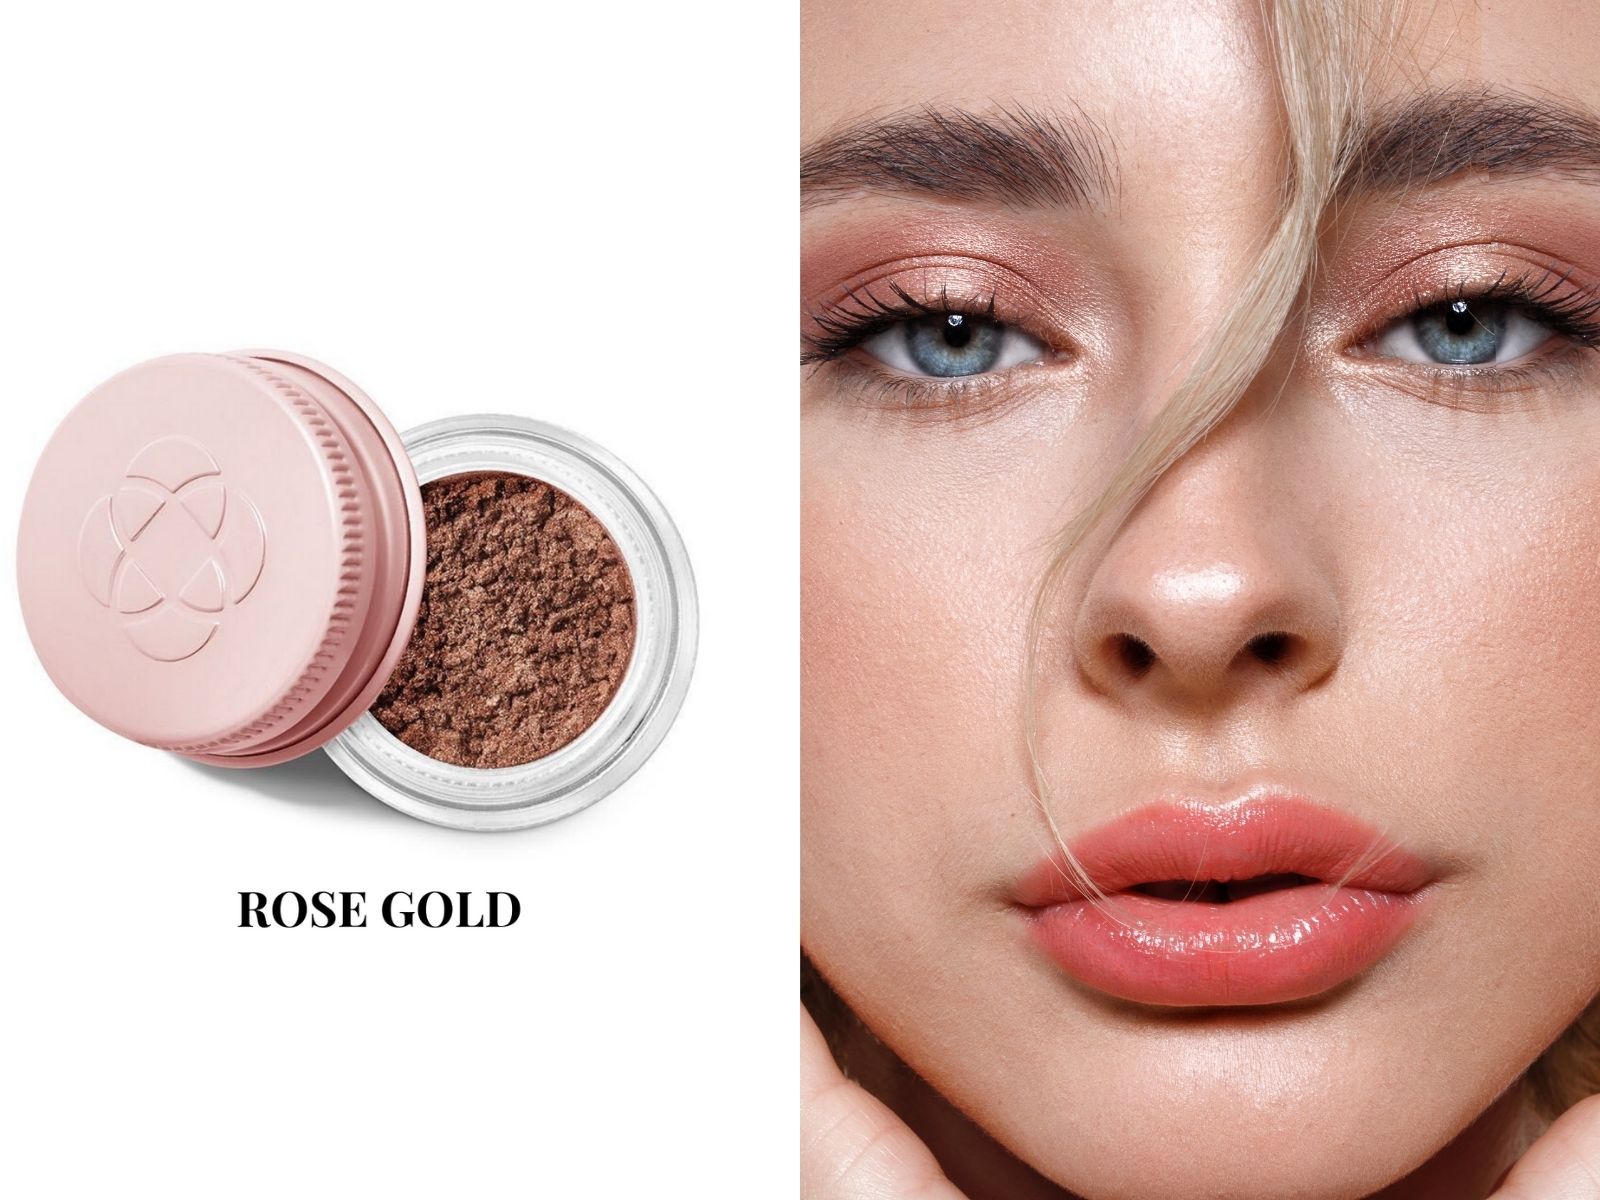 Brązowo-różowy pigment mineralny Rose Gold od Annabelle Minerals